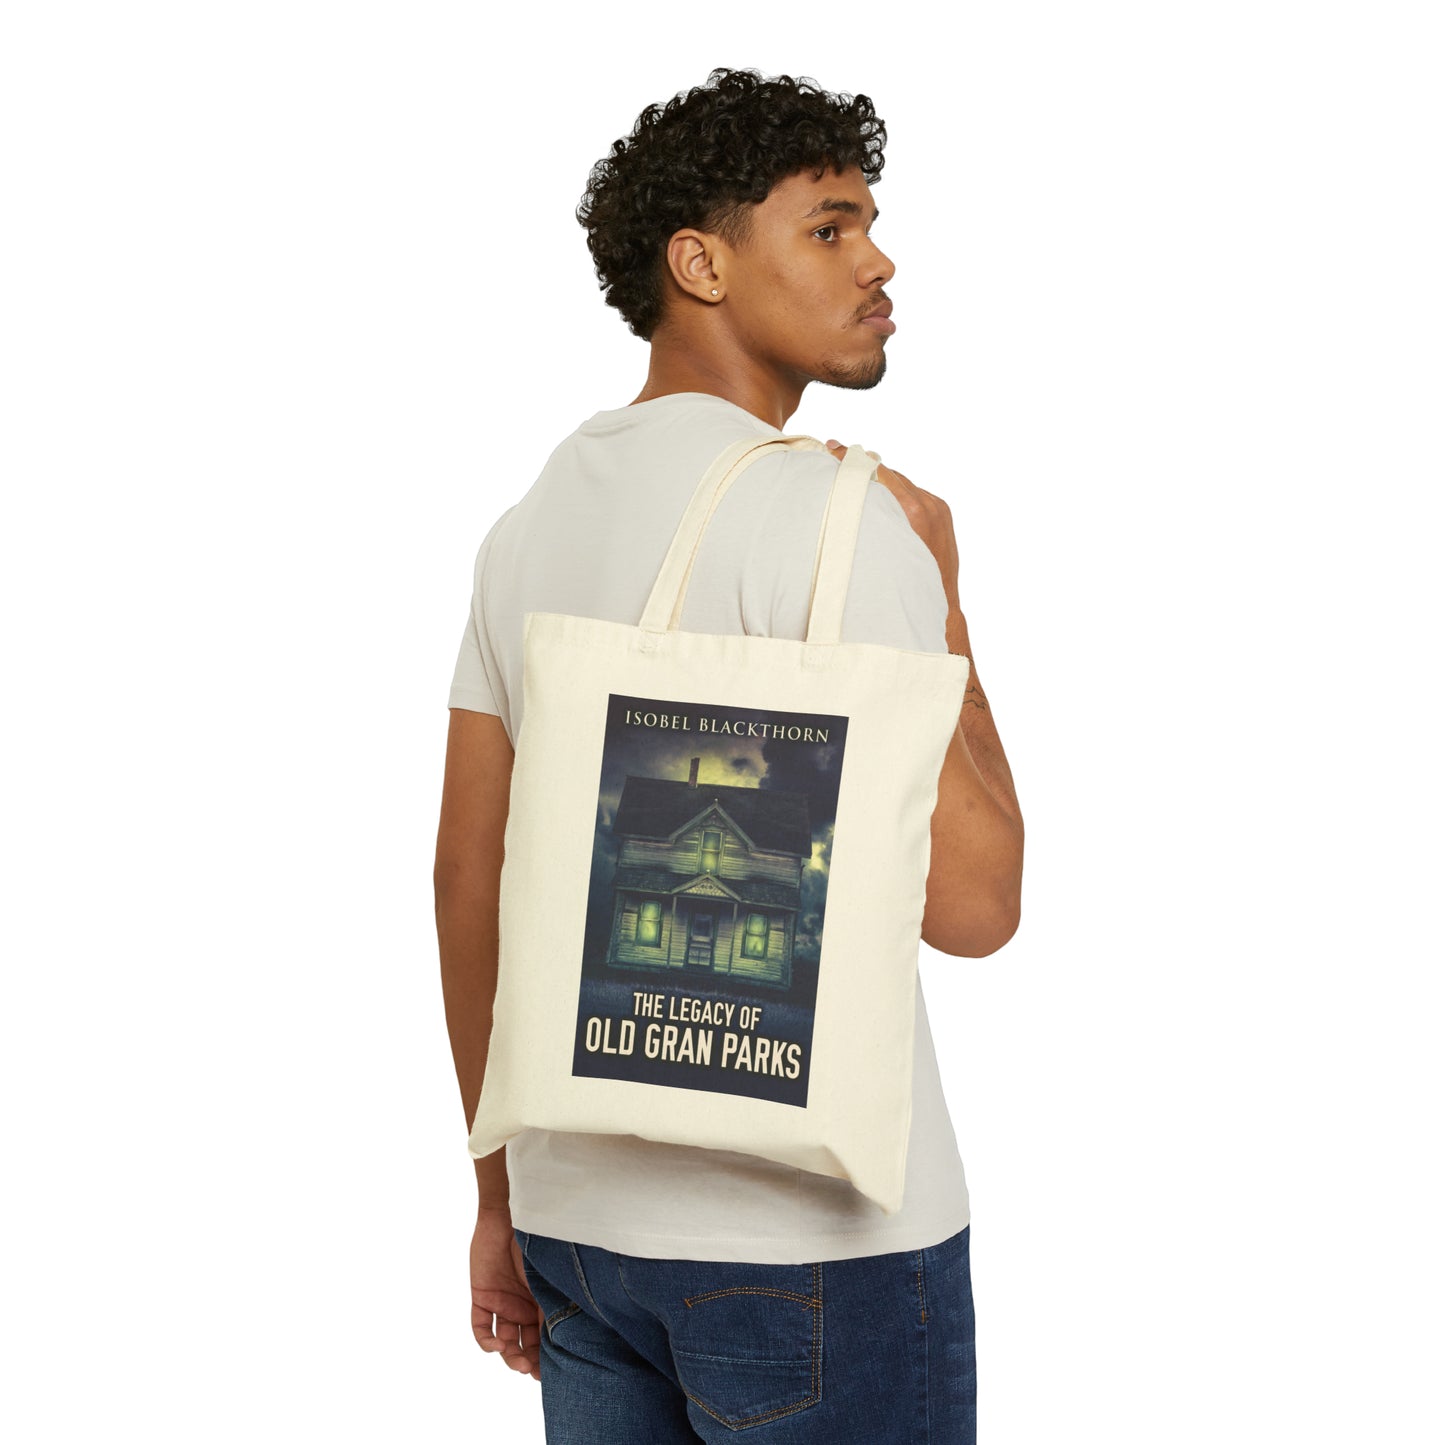 The Legacy Of Old Gran Parks - Cotton Canvas Tote Bag